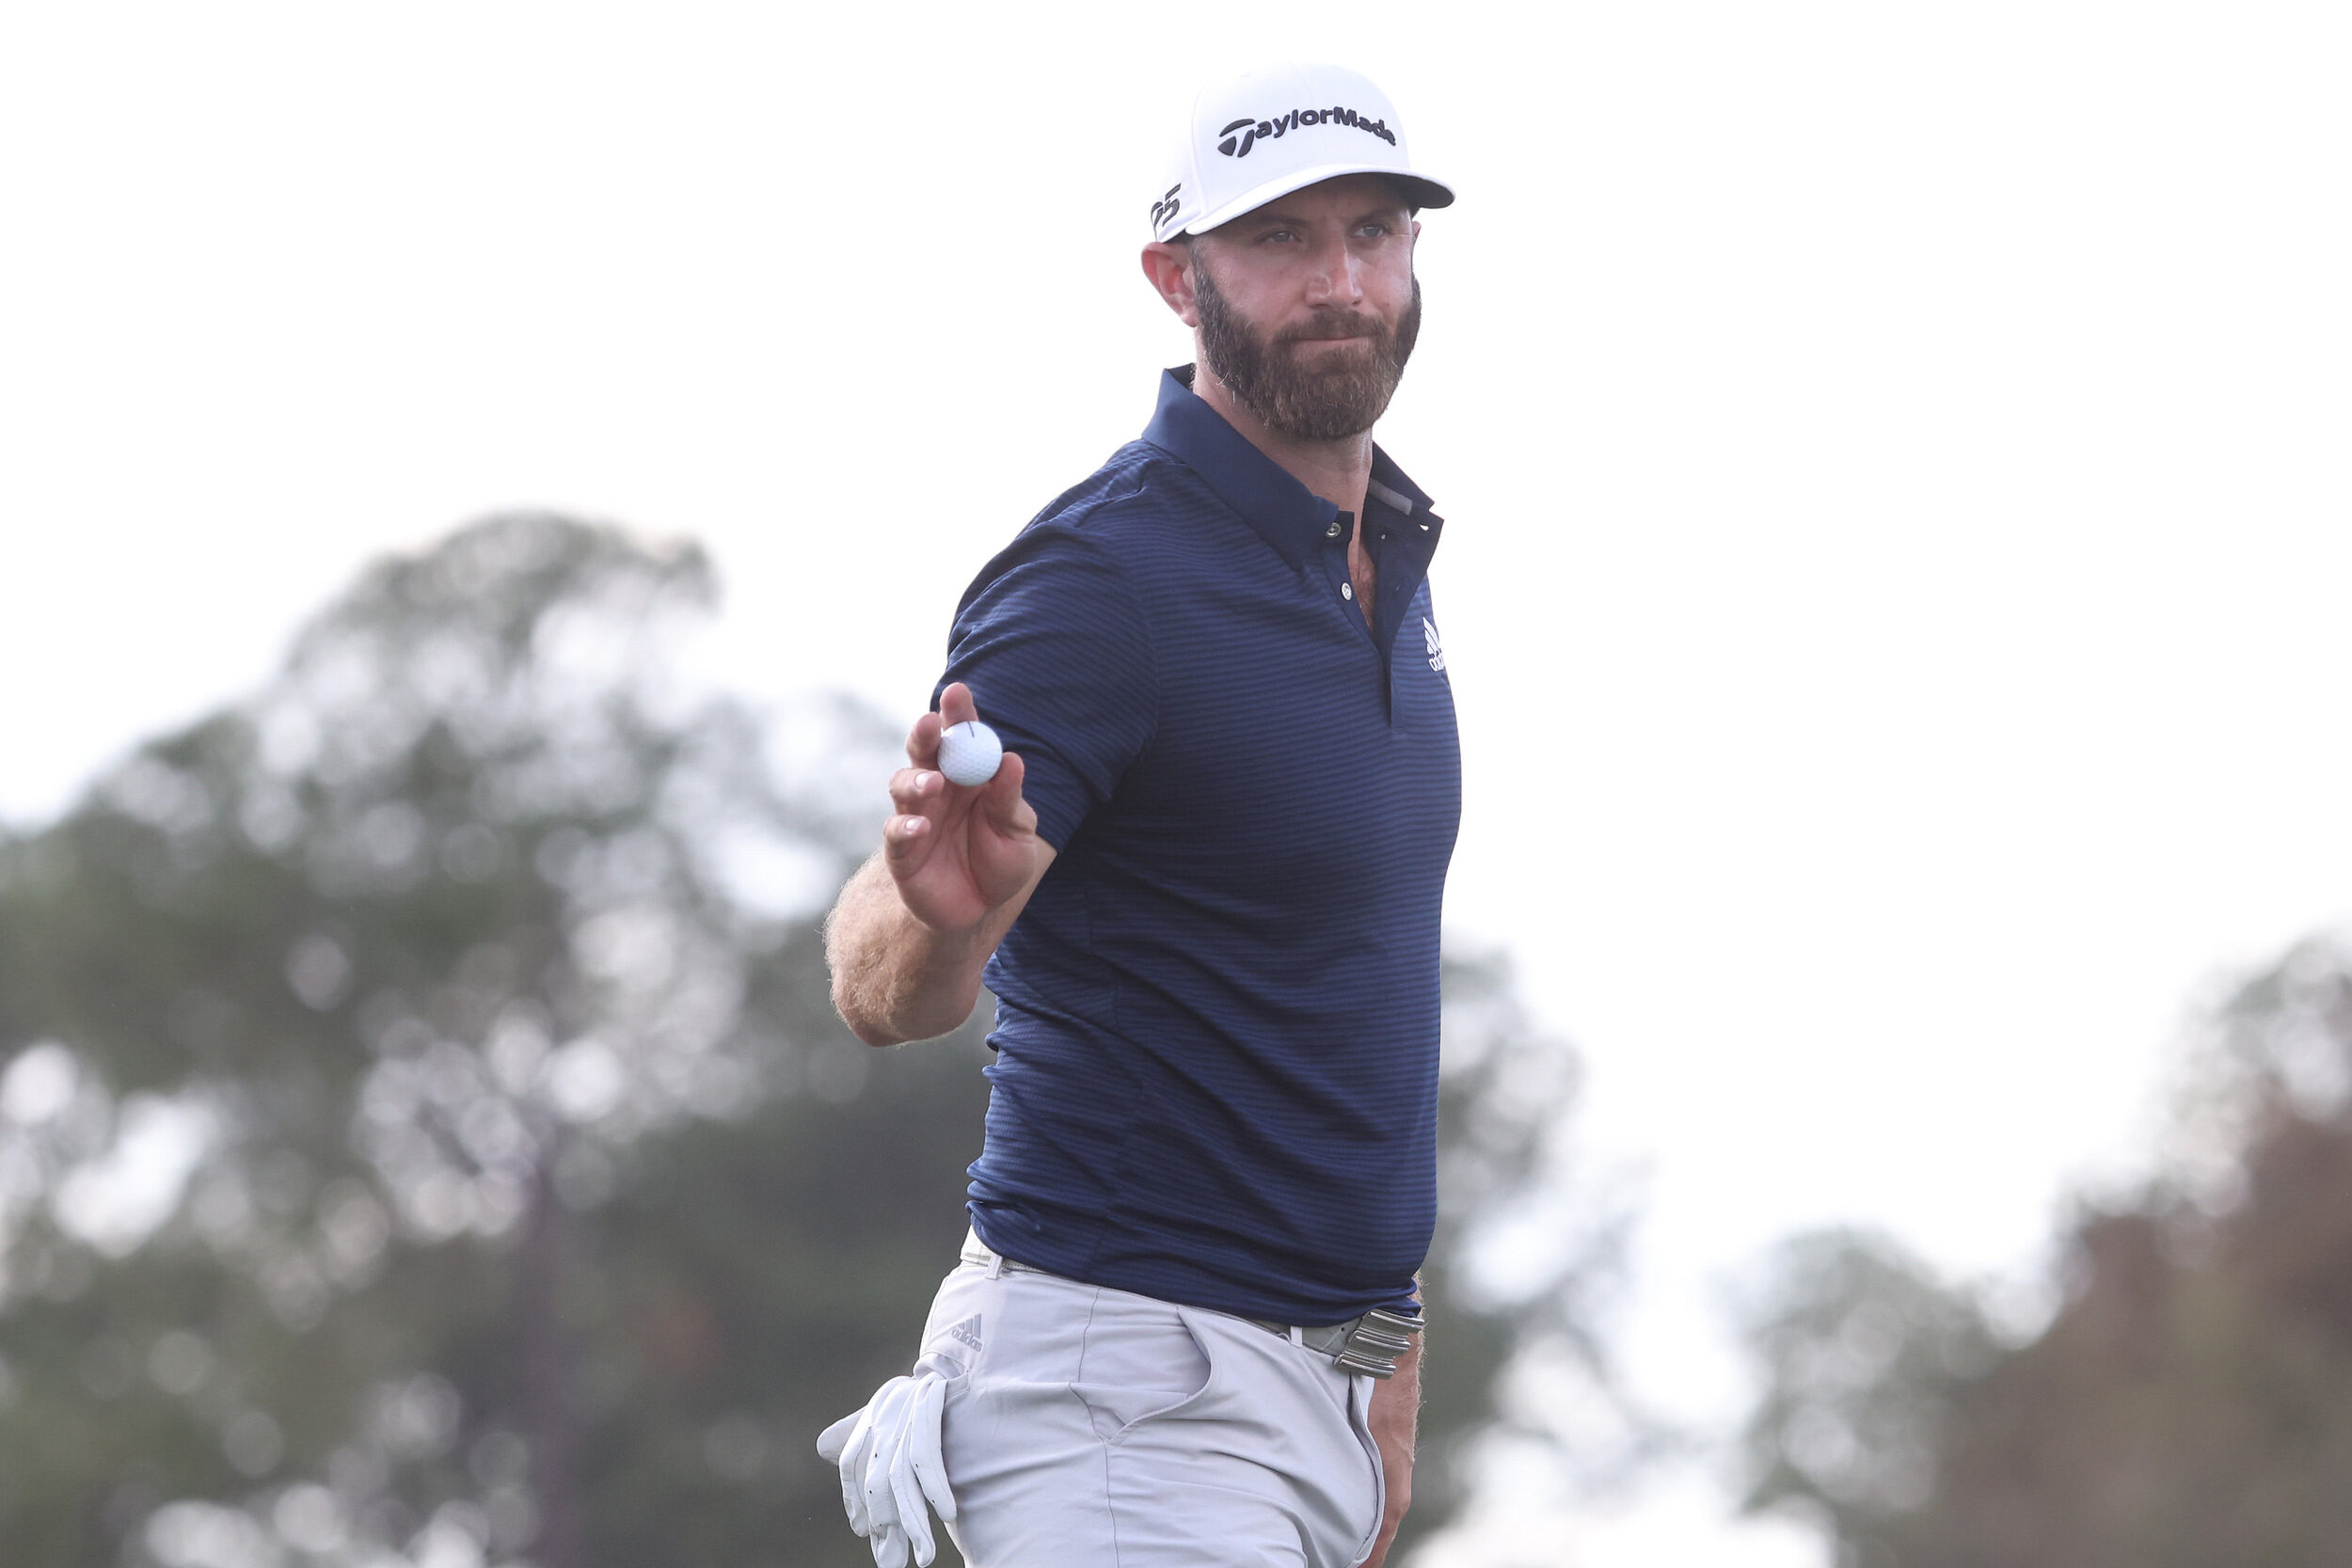  HOUSTON, TEXAS - NOVEMBER 08: Dustin Johnson of the United States waves to the crowd after finishing his final round of the Houston Open at Memorial Park Golf Course on November 08, 2020 in Houston, Texas. (Photo by Maddie Meyer/Getty Images) 